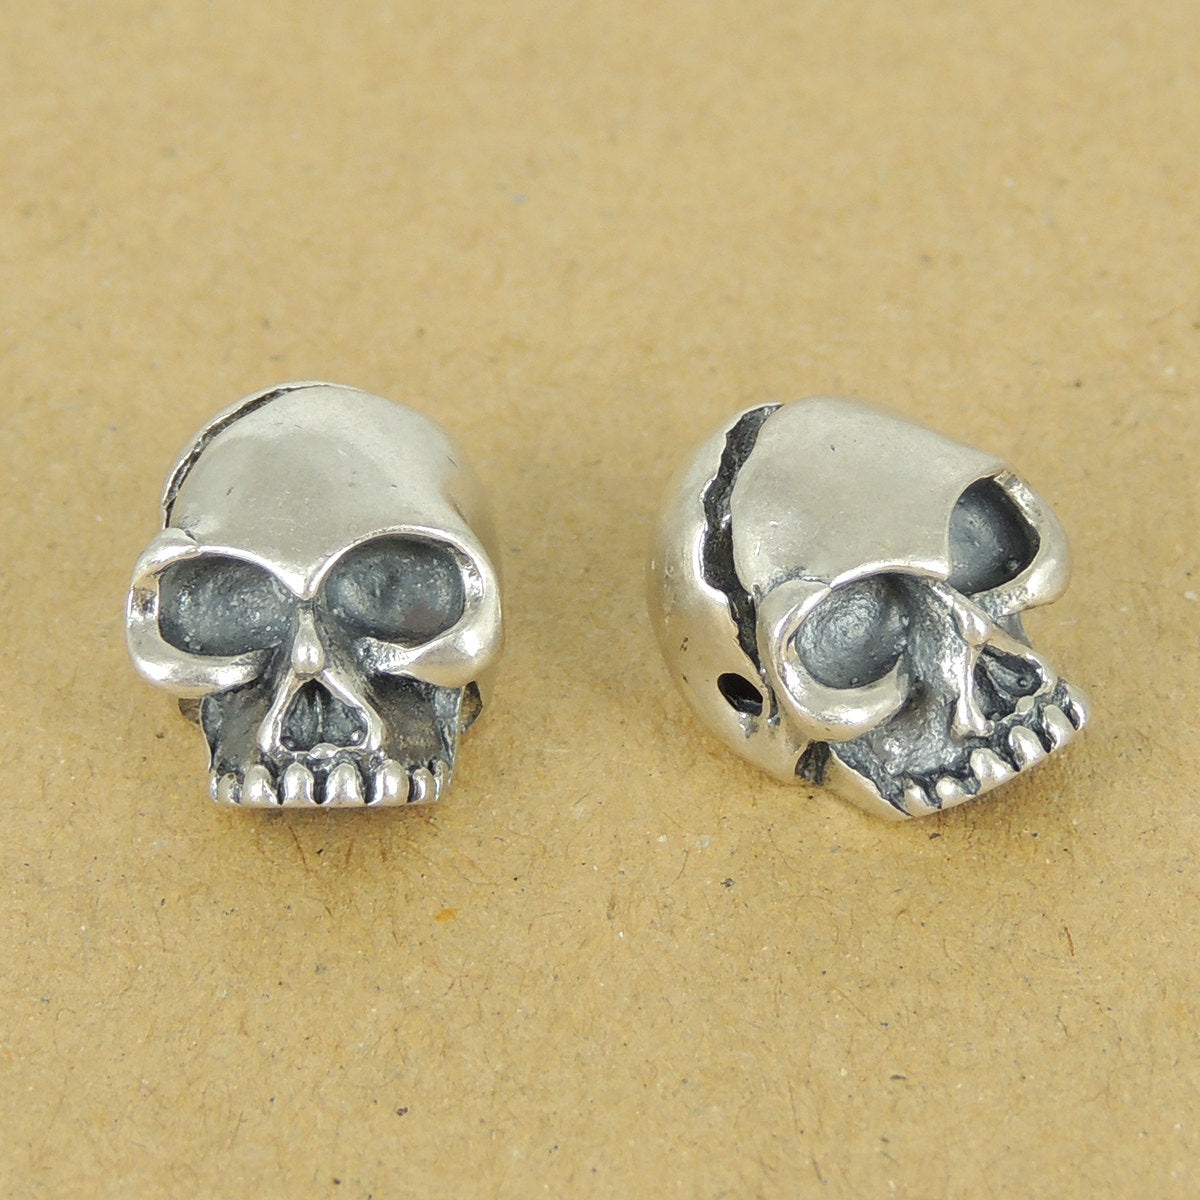 2 PC Protective Skull Beads - S925 Sterling Silver WSP363X2